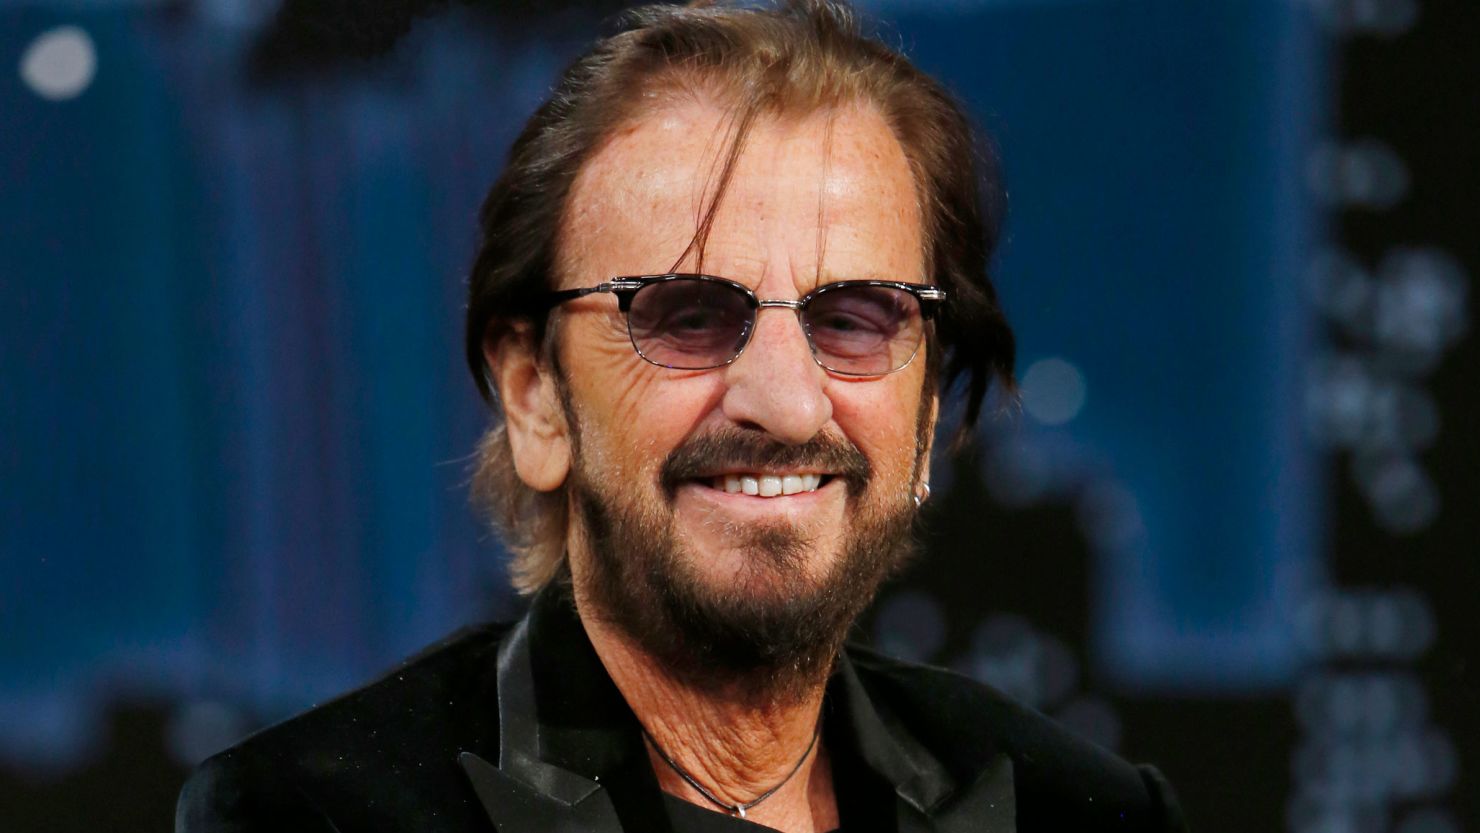 Ringo Starr says The Beatles would 'never' fake John Lennon's vocals with  AI on new song